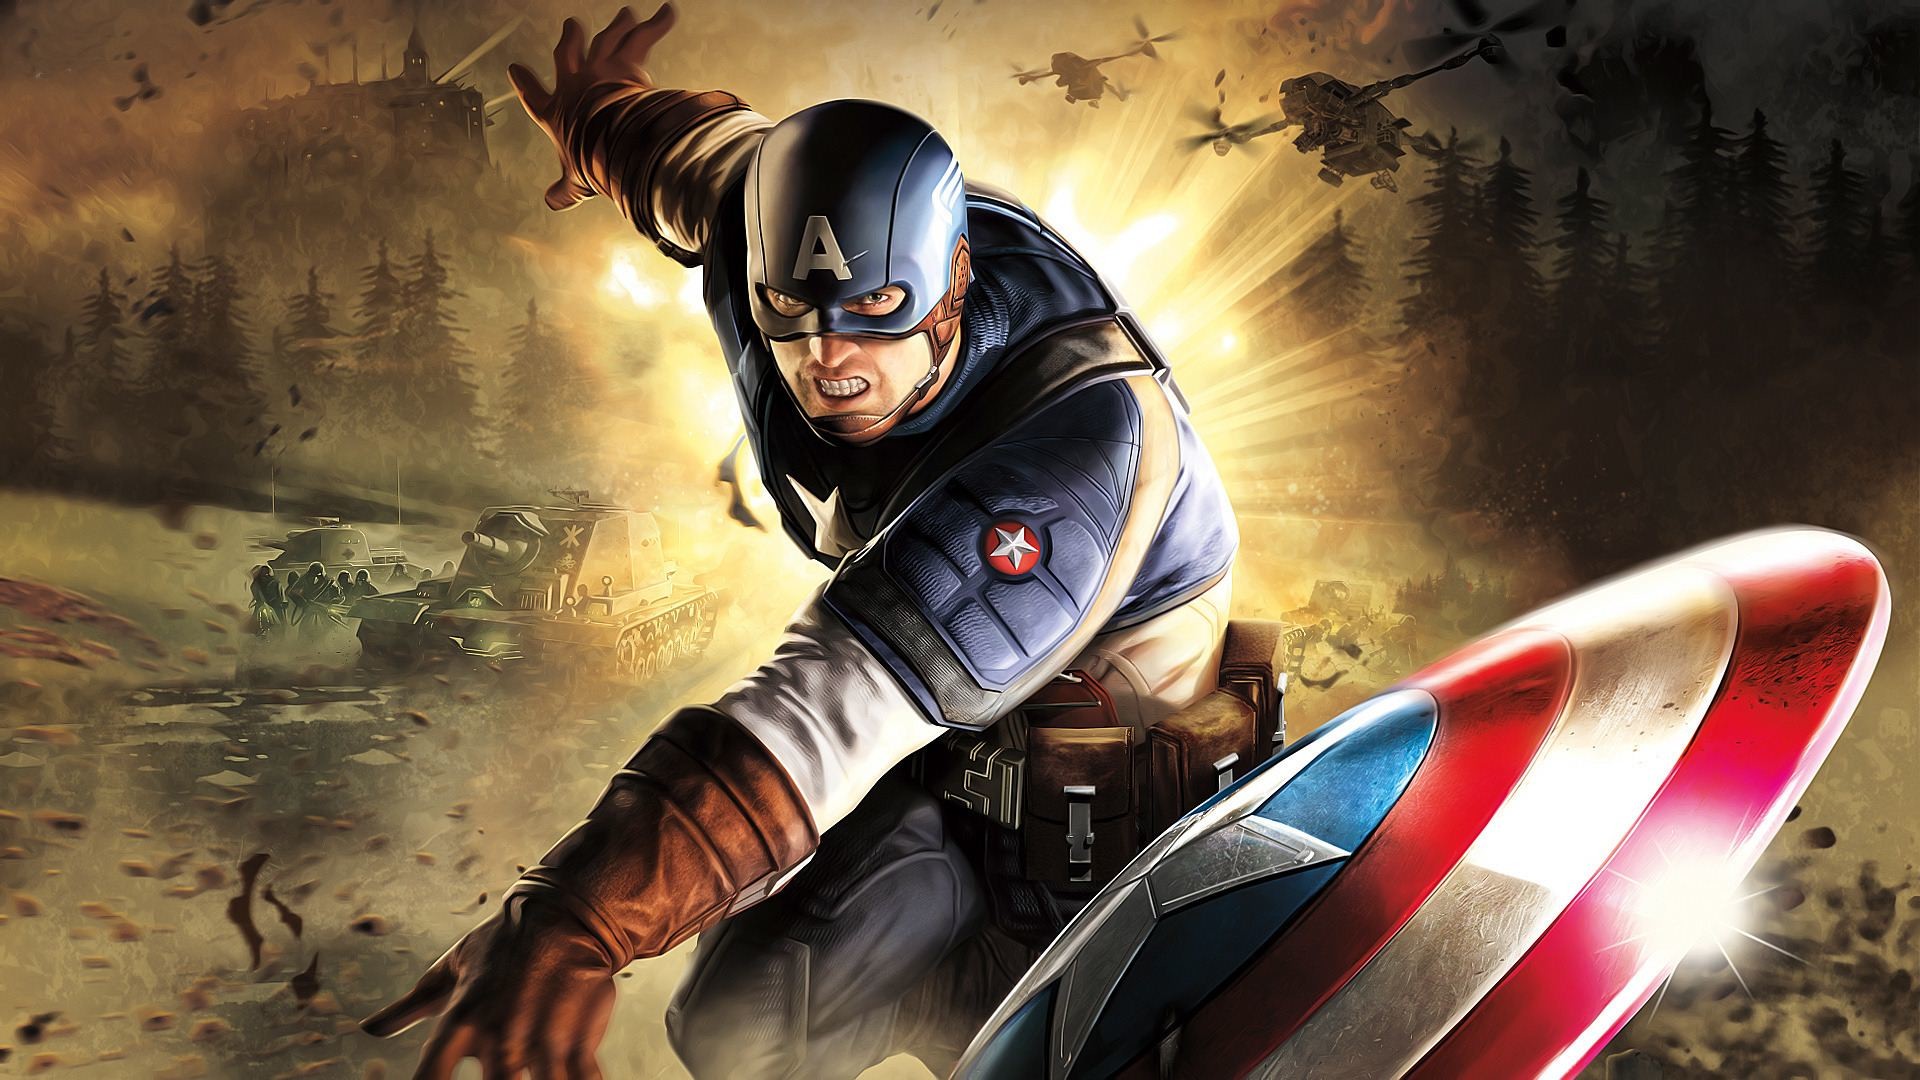 Captain America Wallpapers 1920x1080 (74+ images)